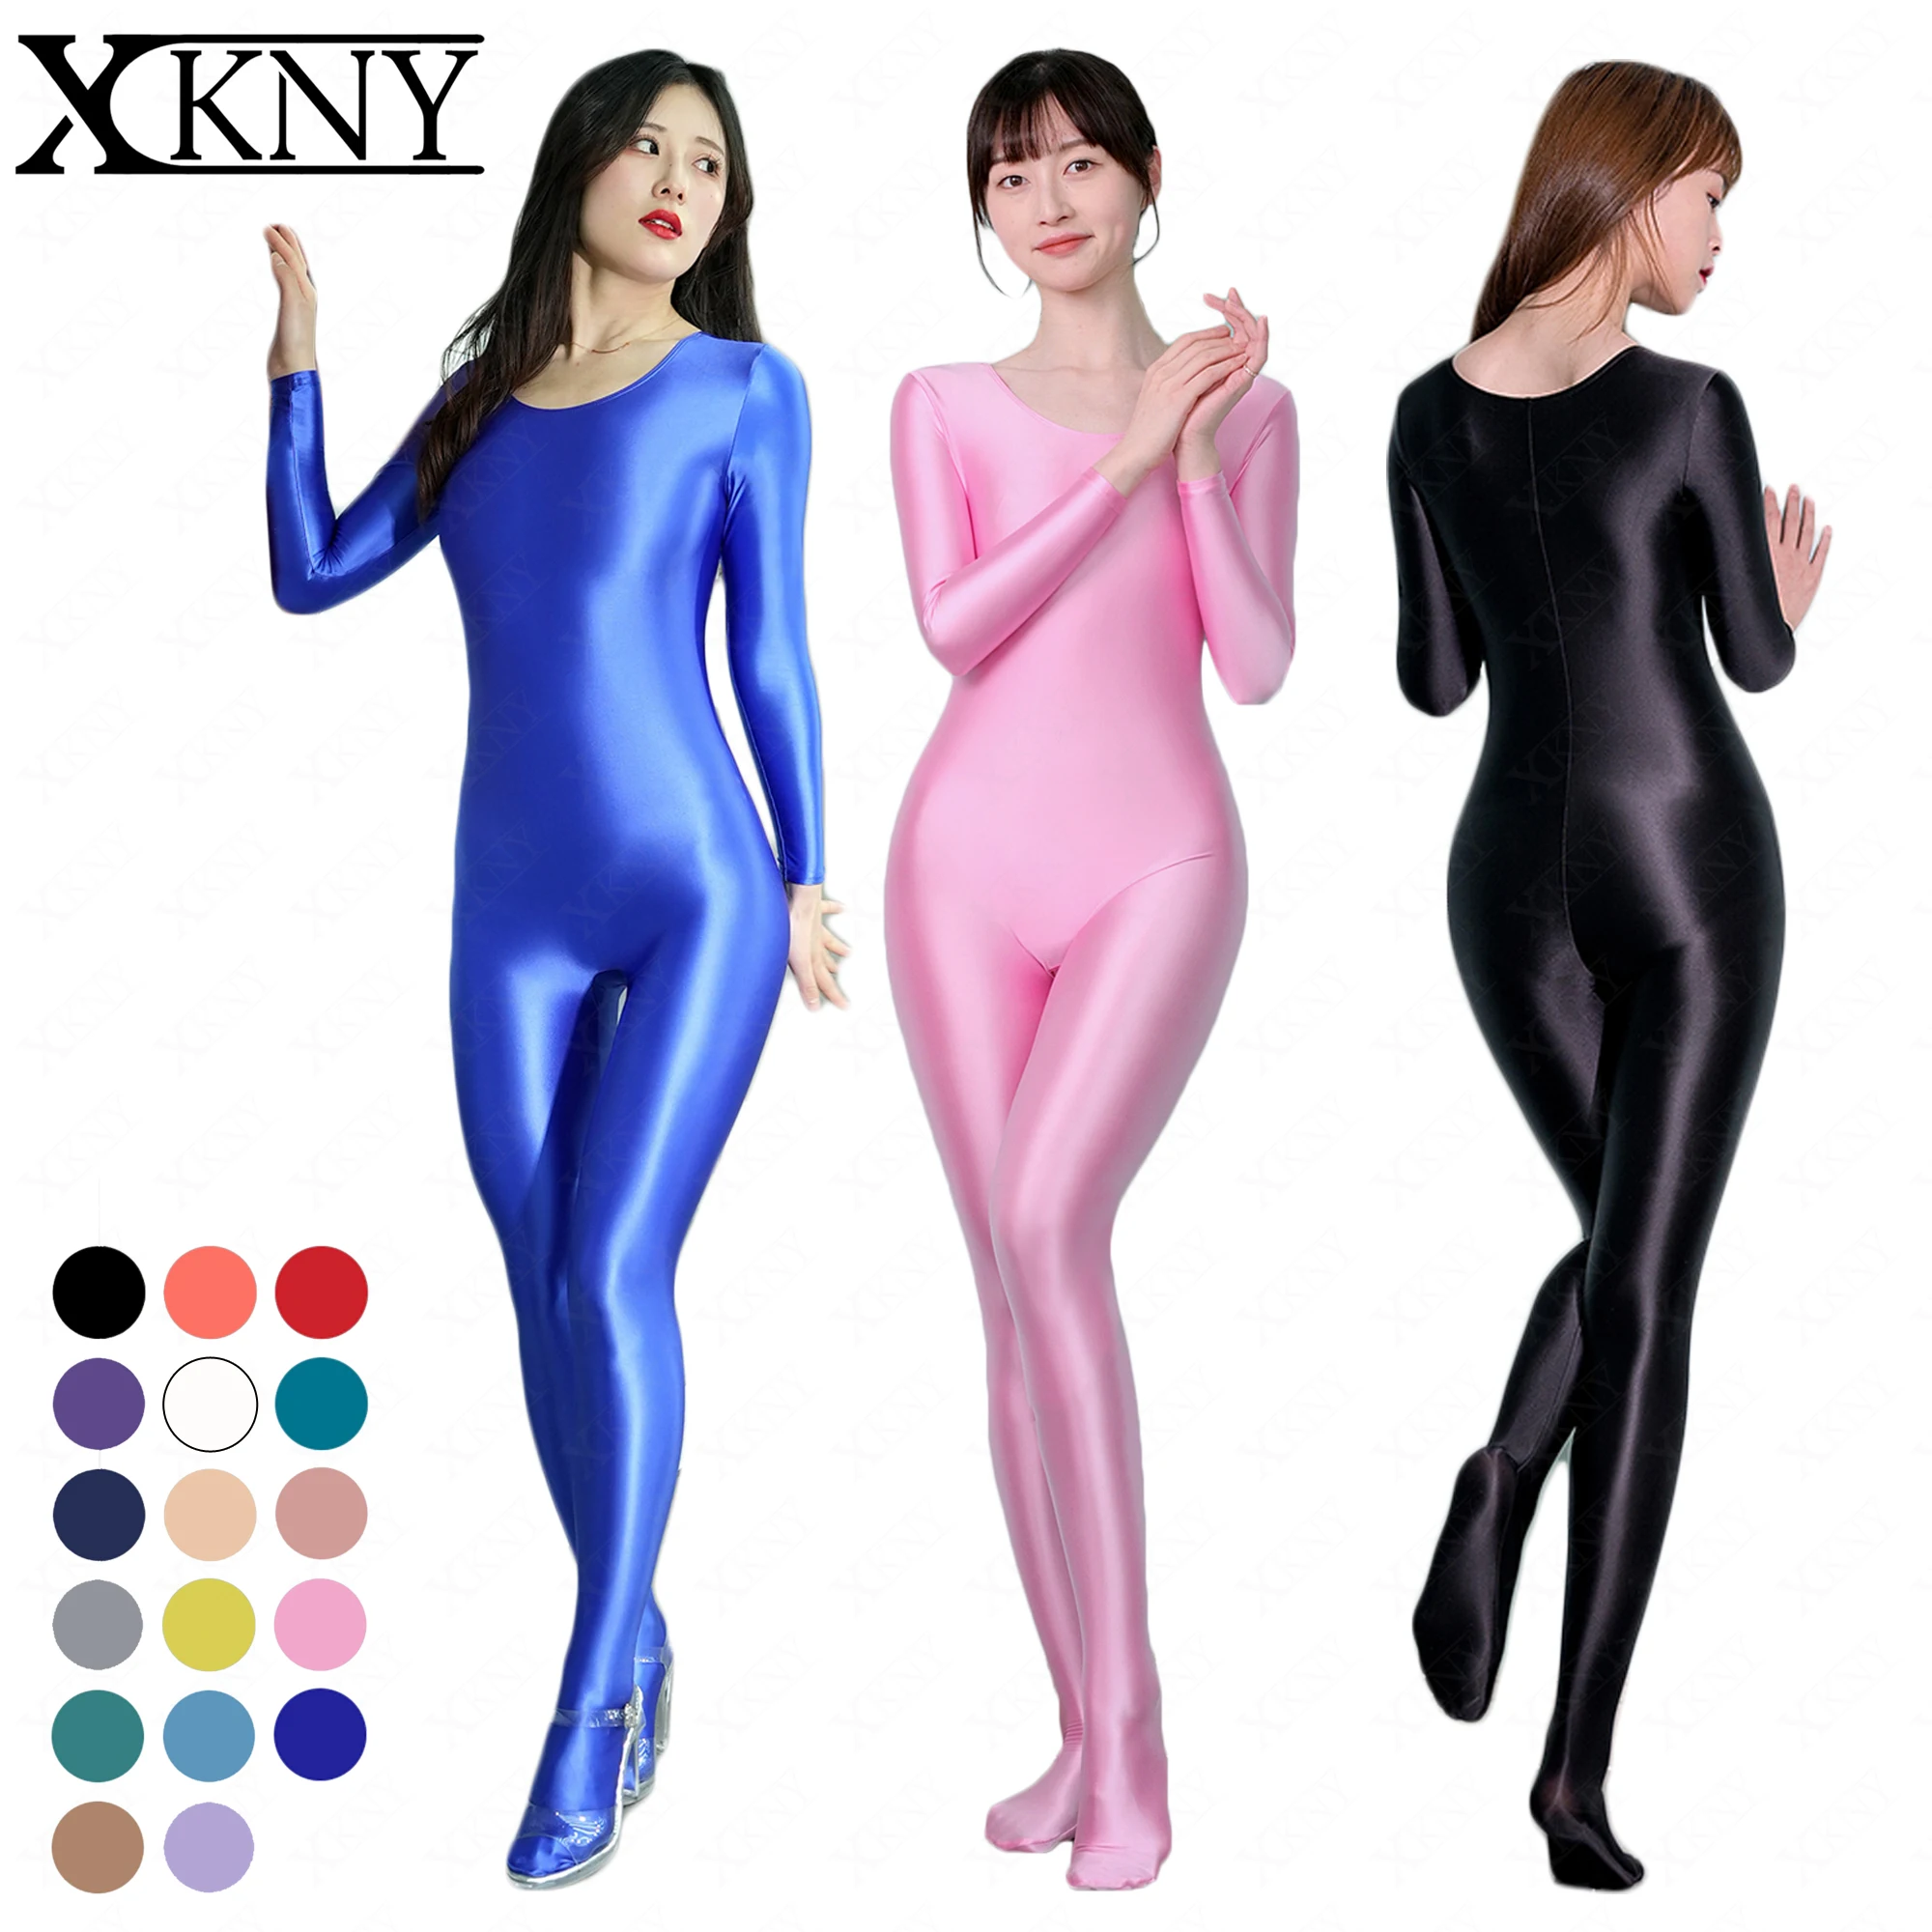 xckny oil glossy tights sexy smooth